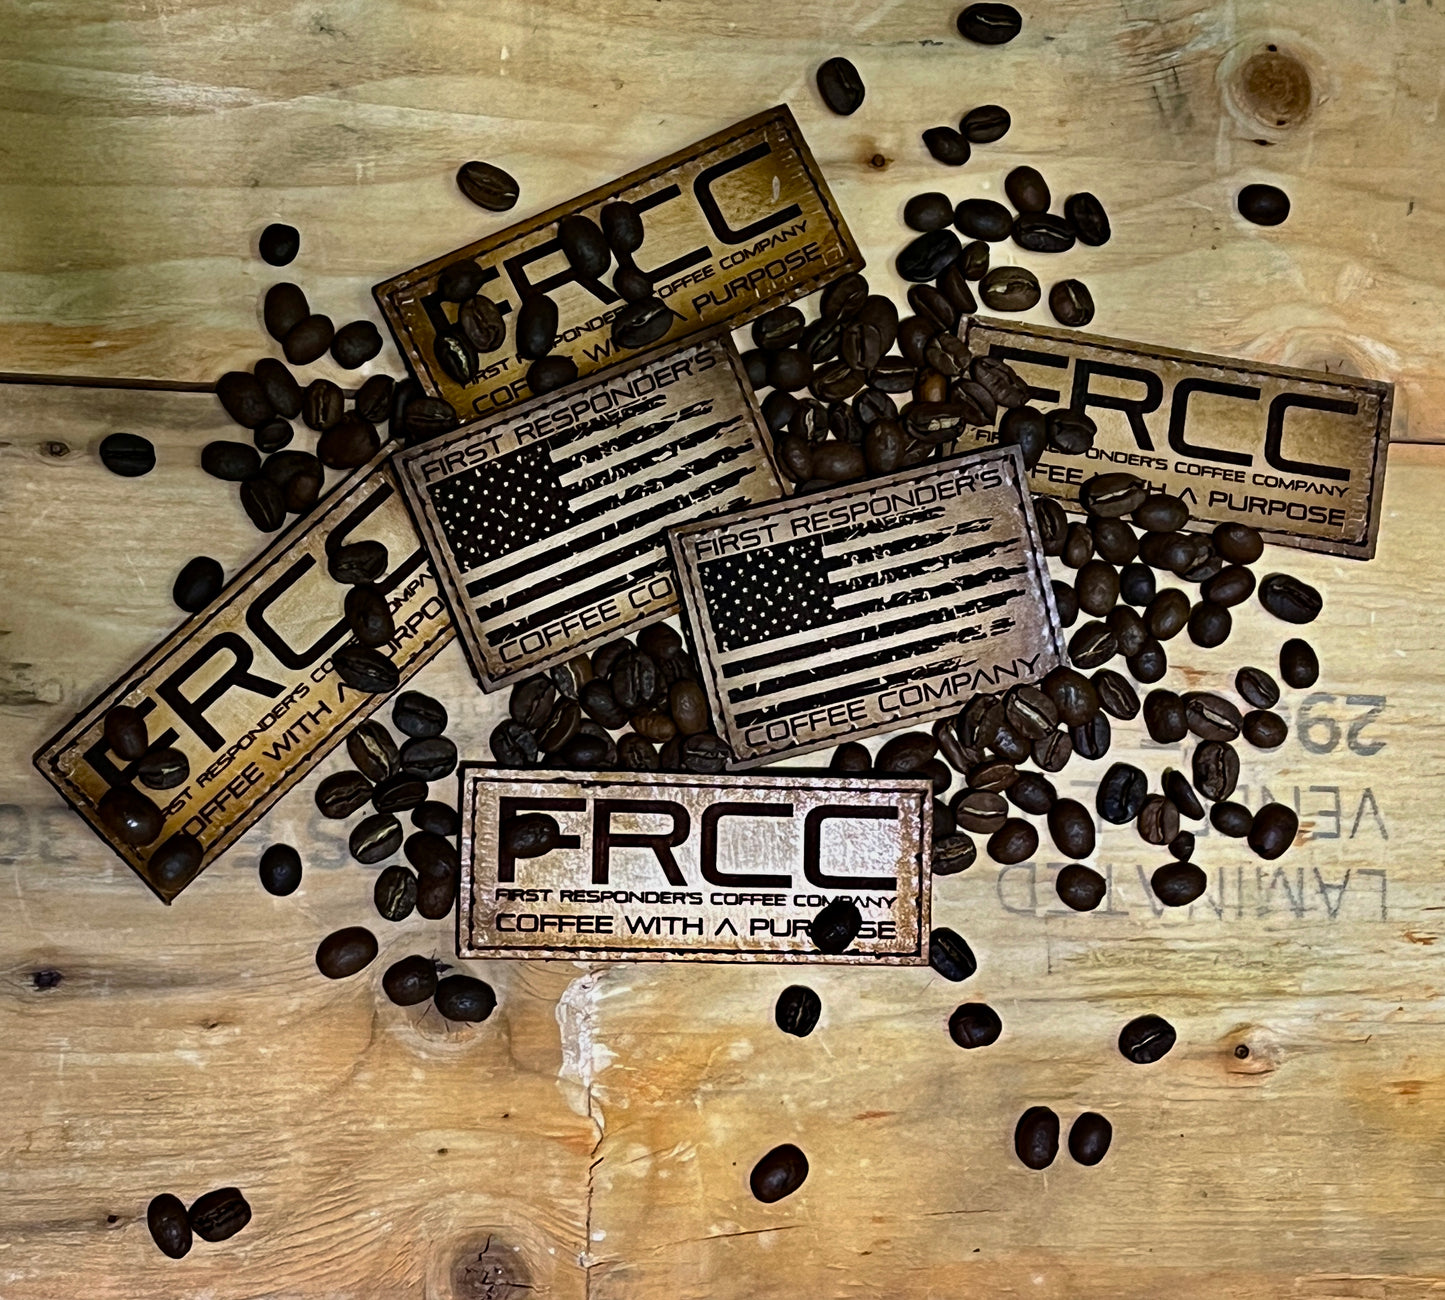 FRCC velcro patches